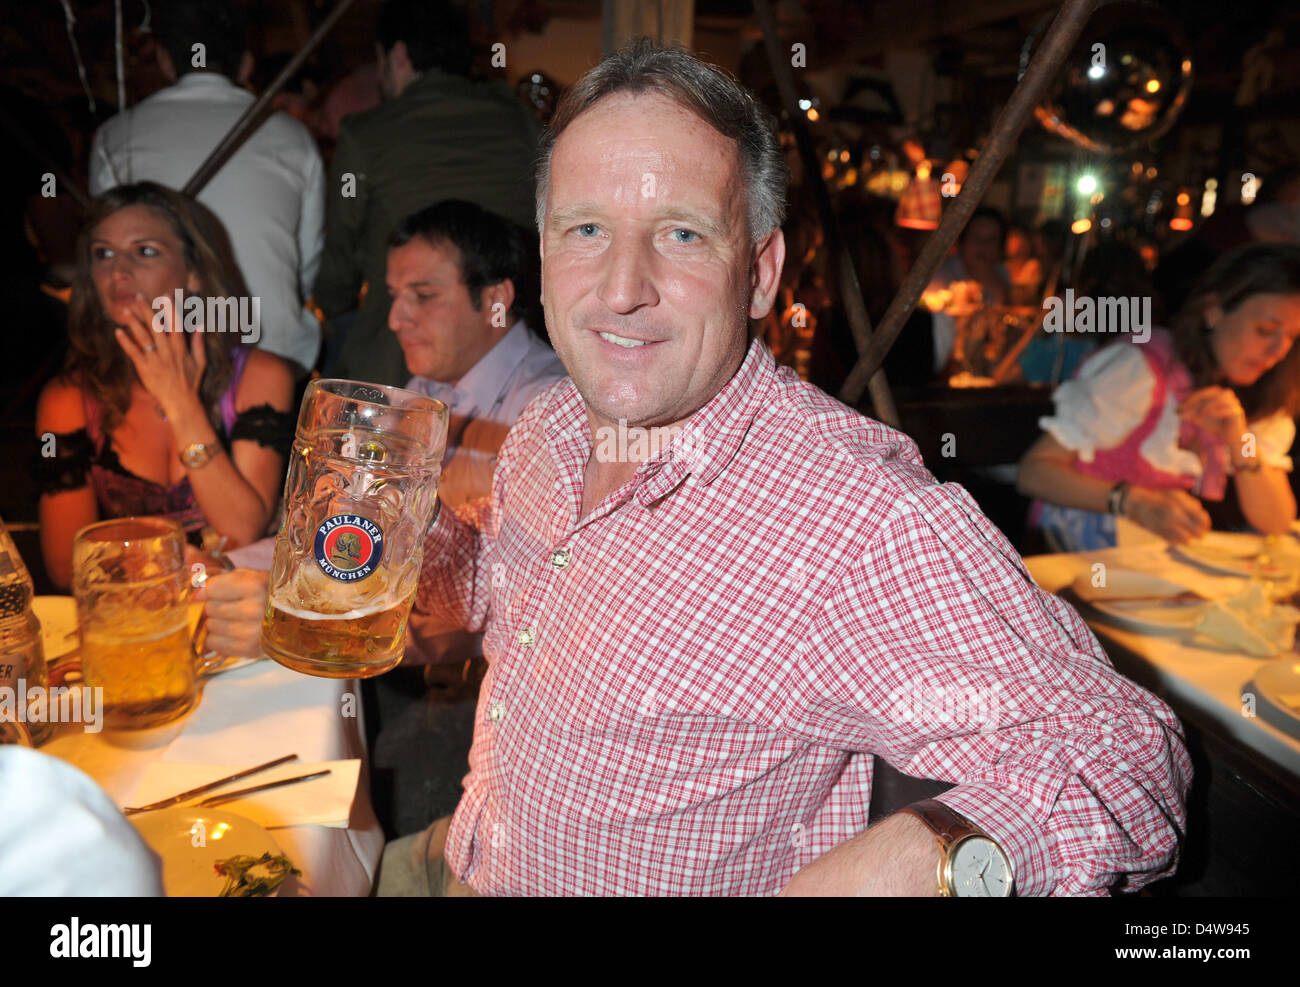 Former German soccer international Andreas Brehme poses for a picture at the 'Almauftrieb' event at the Oktoberfest in Munich, Germany, 19 September 2010. The world's biggest folk festival takes place from 18 September until 03 October 2010 for the 177th time. A total of six million visitors are expected. Photo: Felix Hoerhager Stock Photo